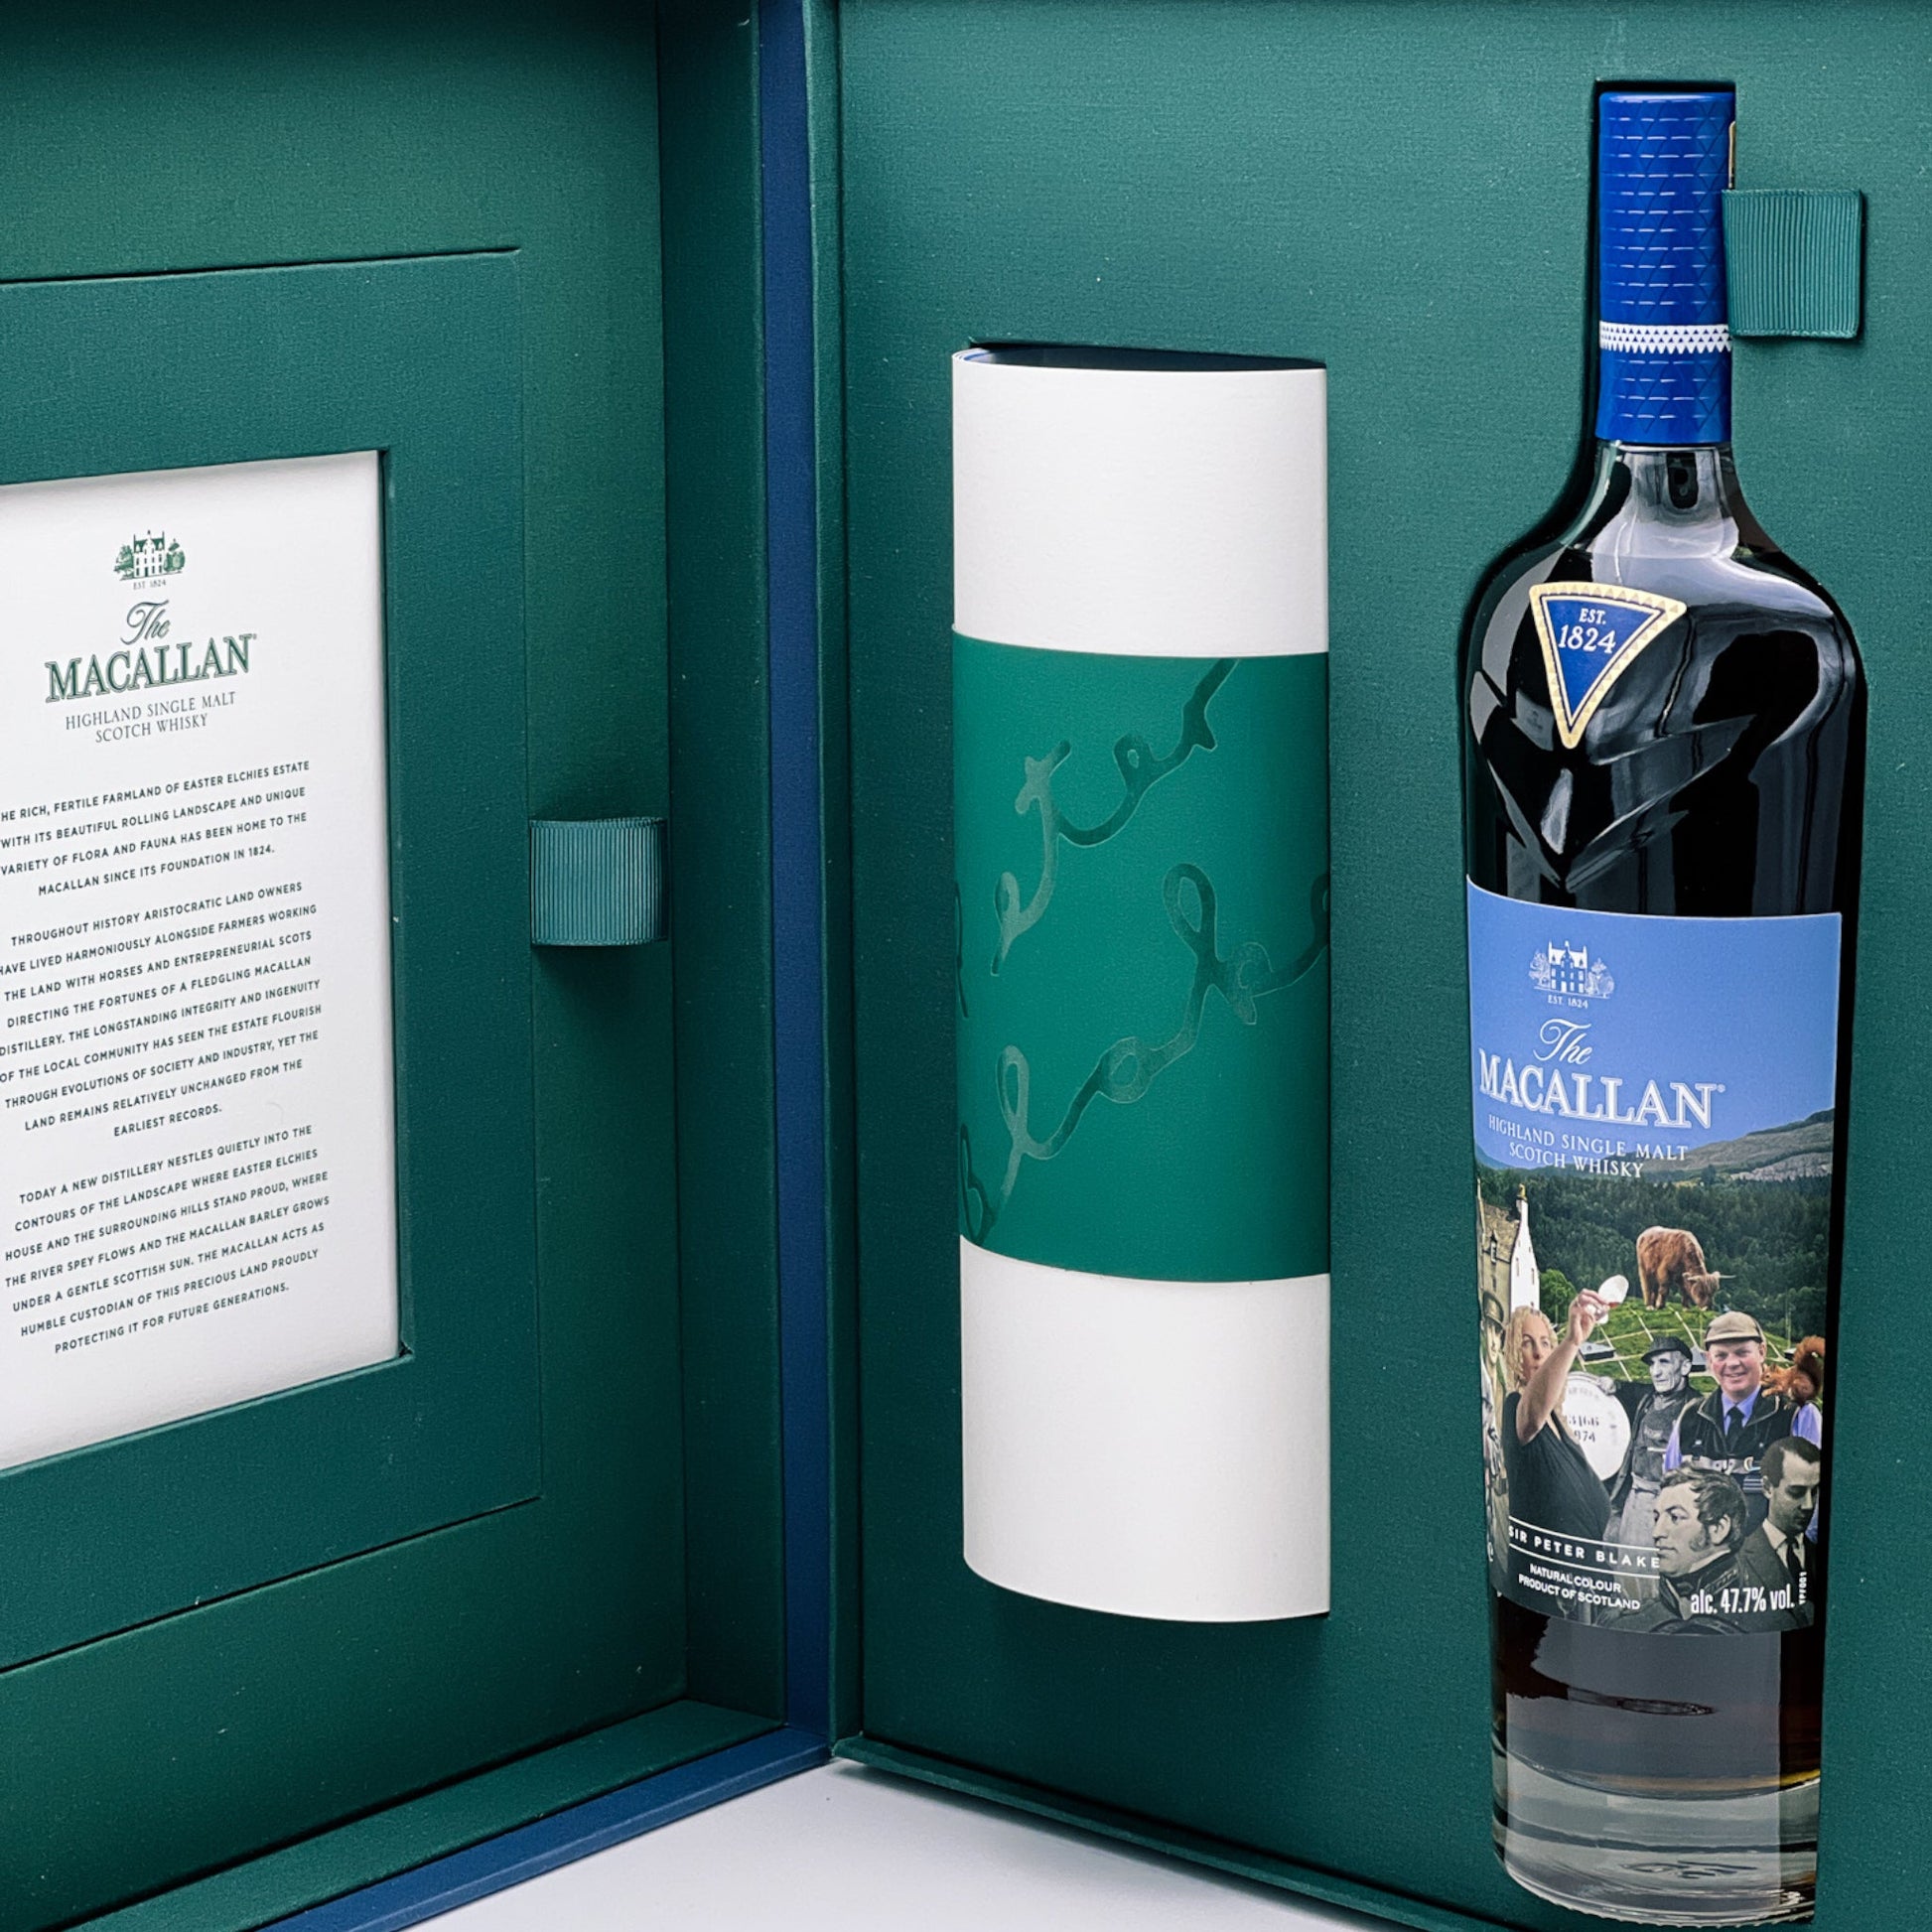 The Macallan | Peter Blake | Anecdotes of Ages | An Estate, a Community and a Distillery | 0,7l | 47,7%GET A BOTTLE